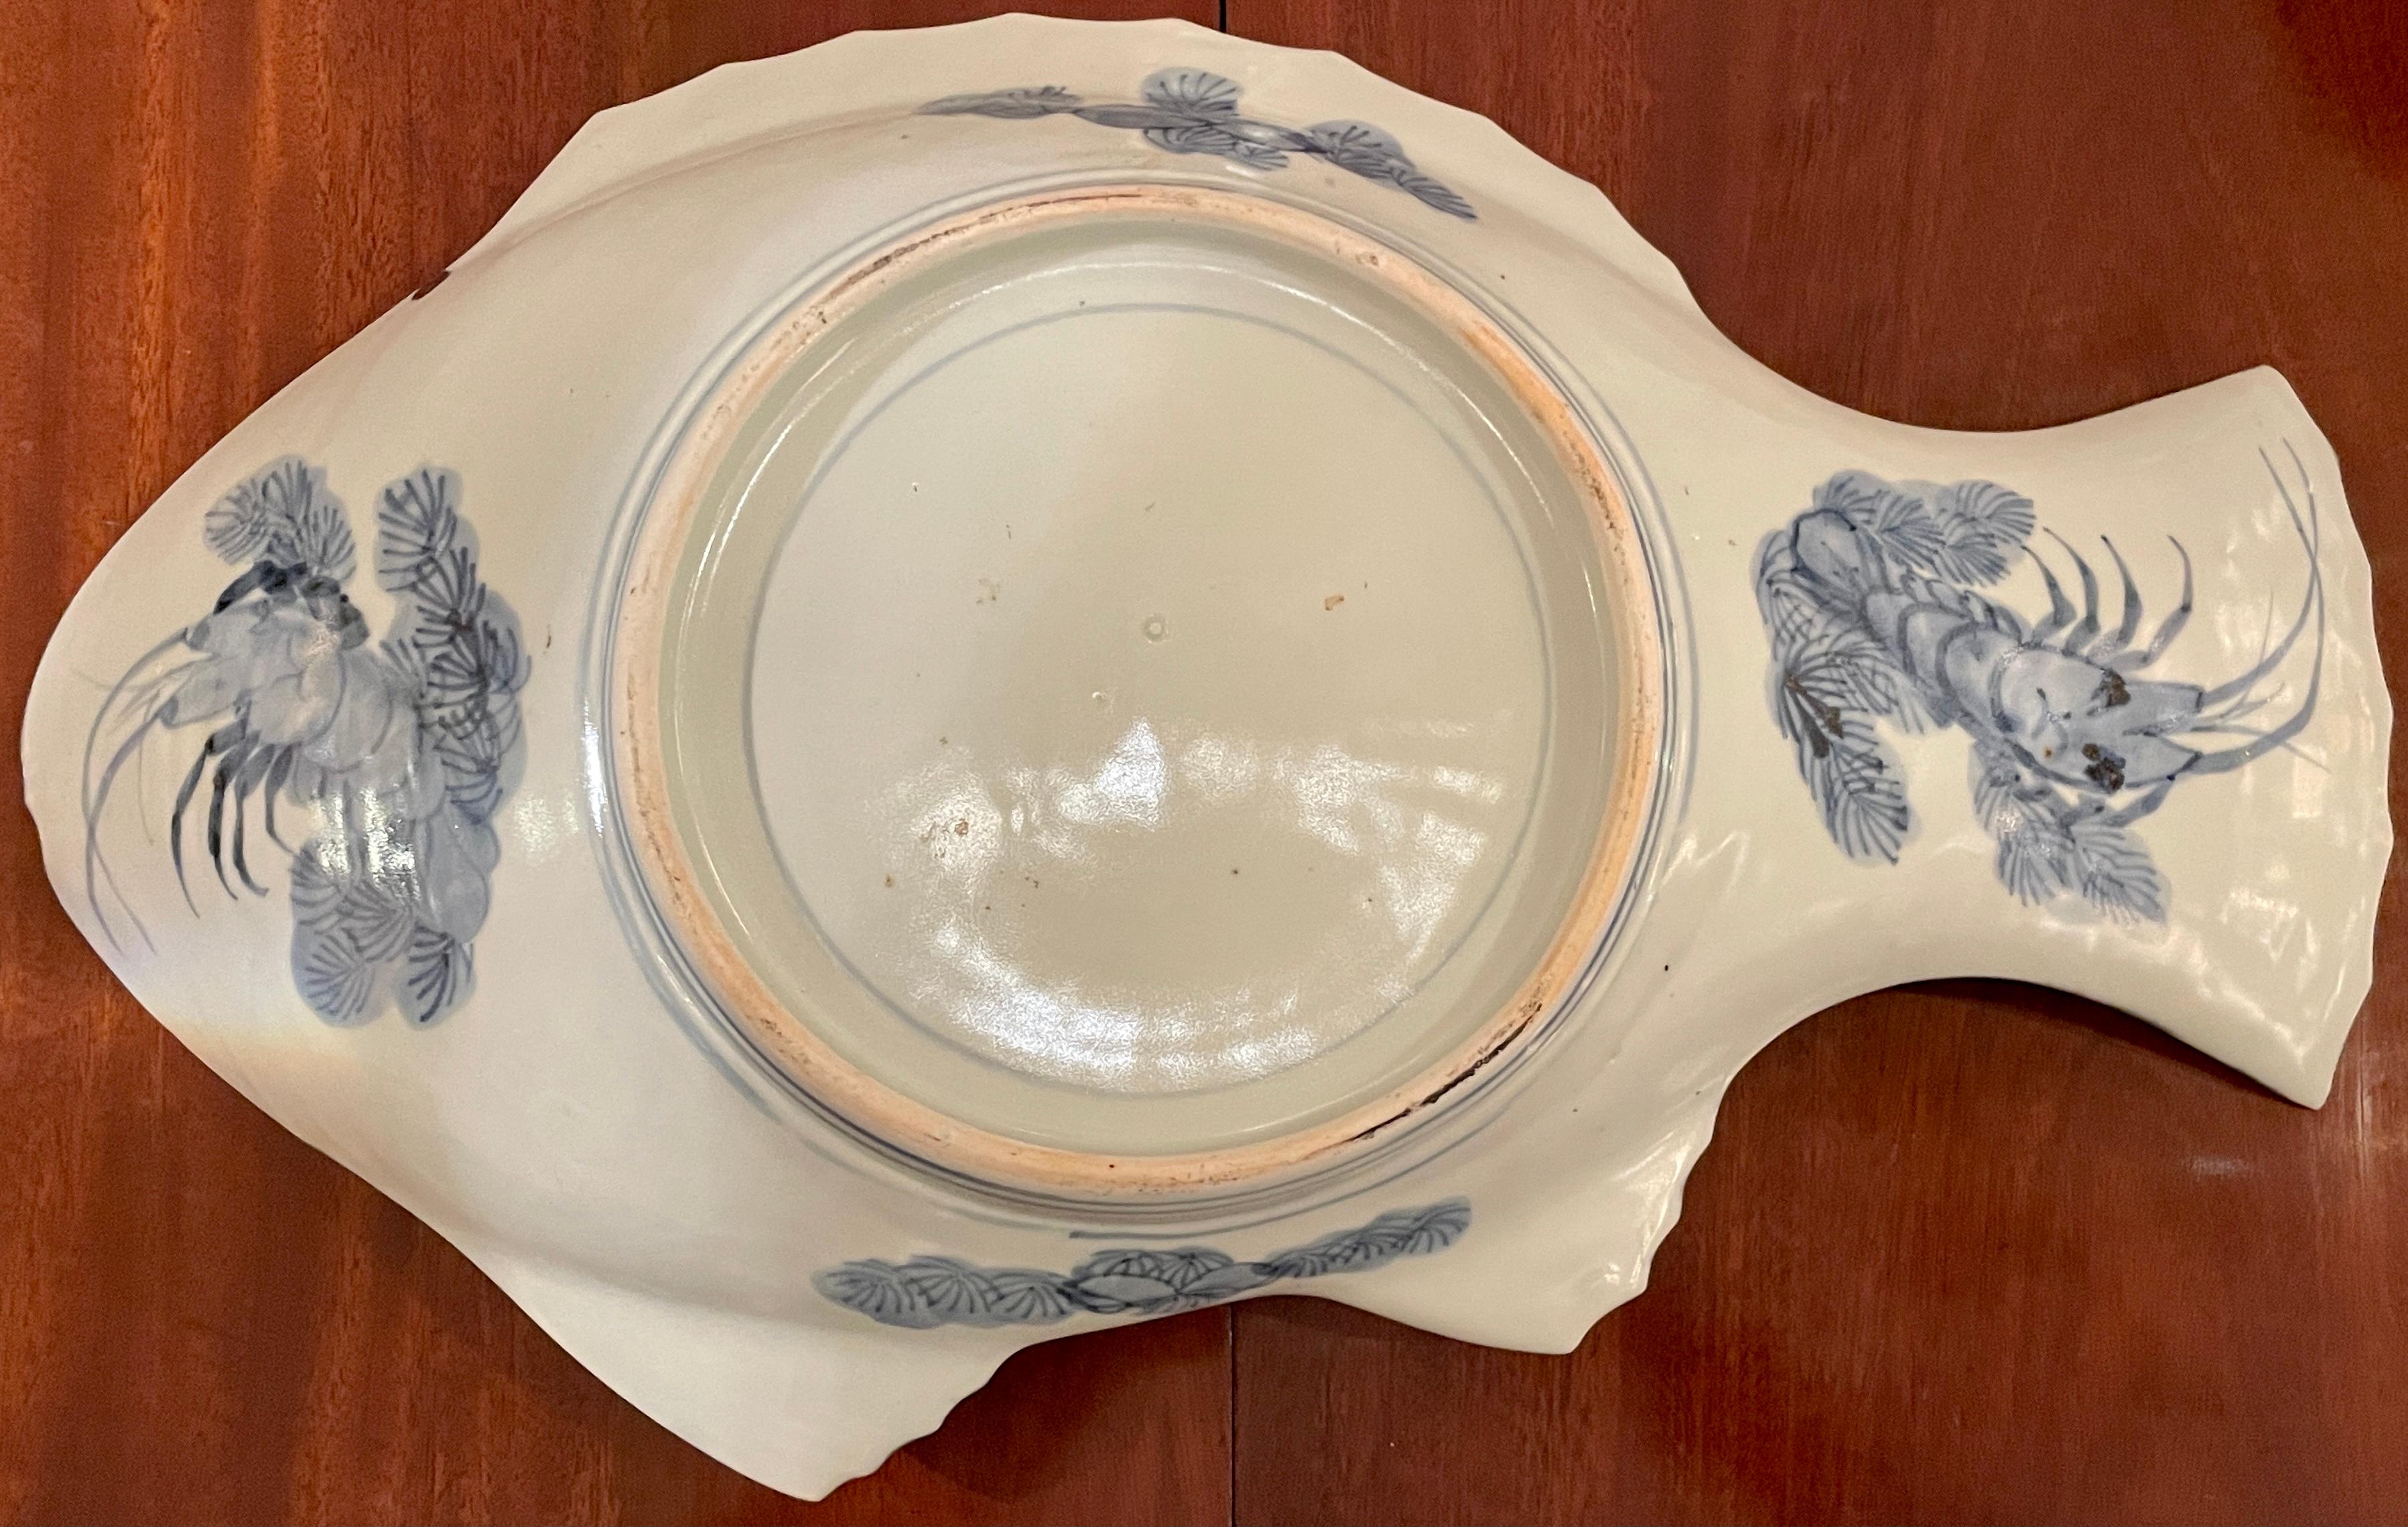 Antique Late 19th Century Japanese Porcelain Fish-Shaped Platter circa 1890-1910 For Sale 1